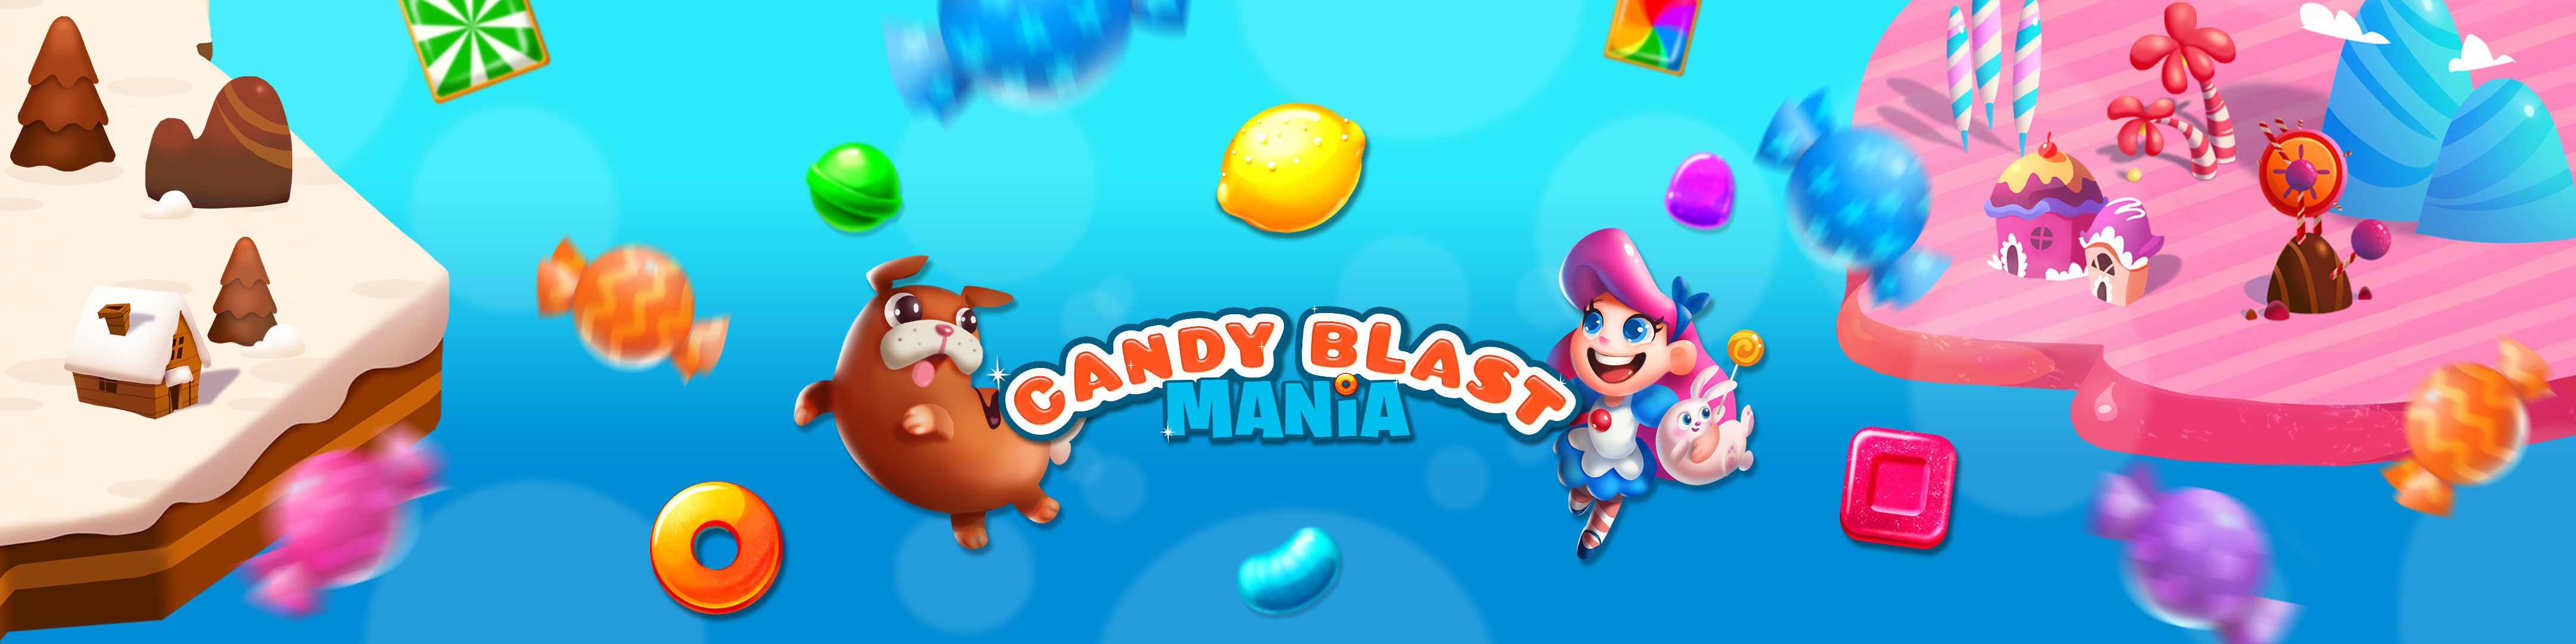 Candy Blast Mania Overview Apple App Store Us - candy girl roblox png